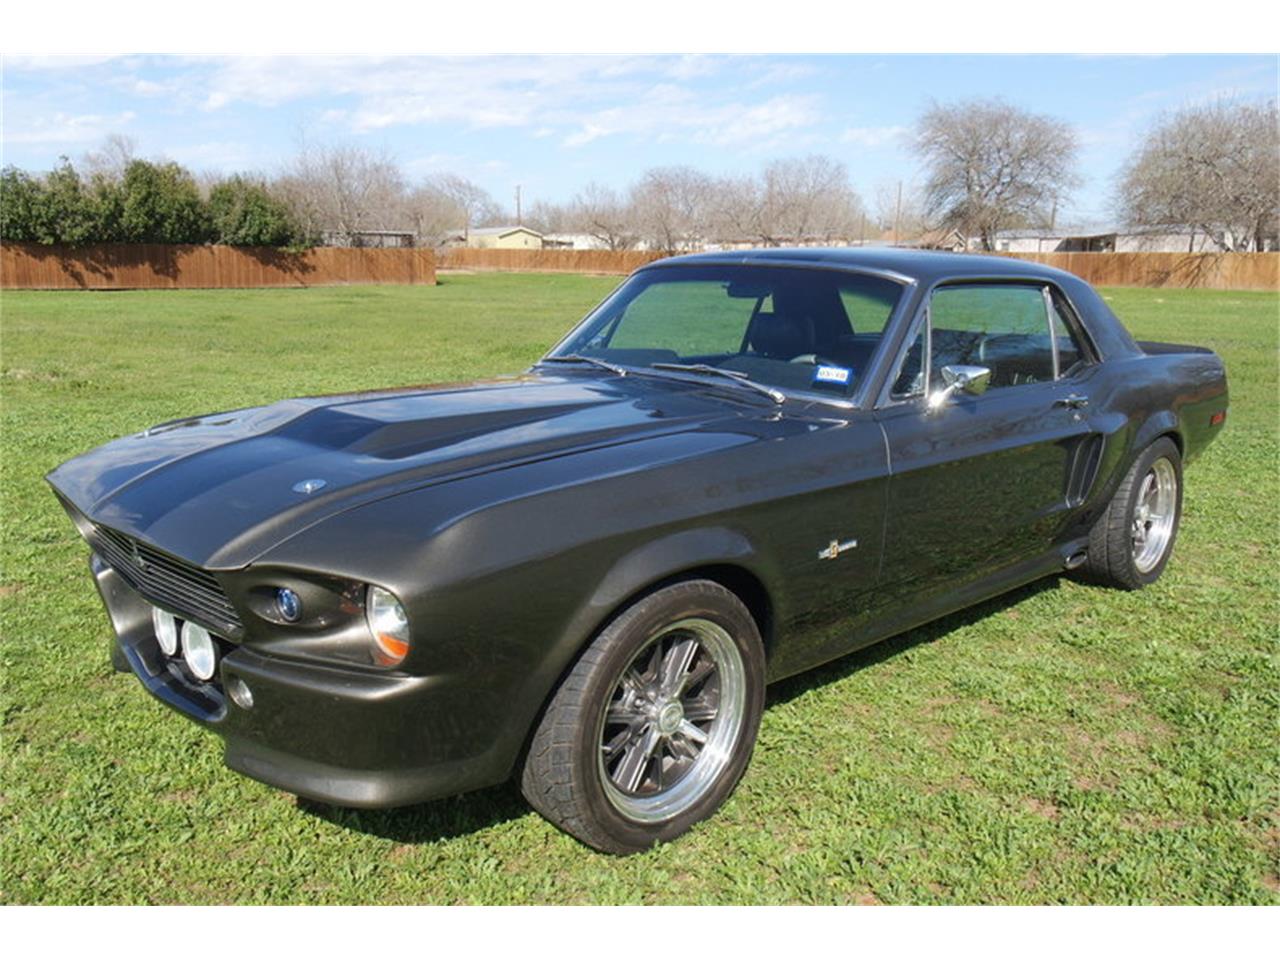 1968 Ford Mustang Eleanor Tribute Eleanor Tribute for Sale ...